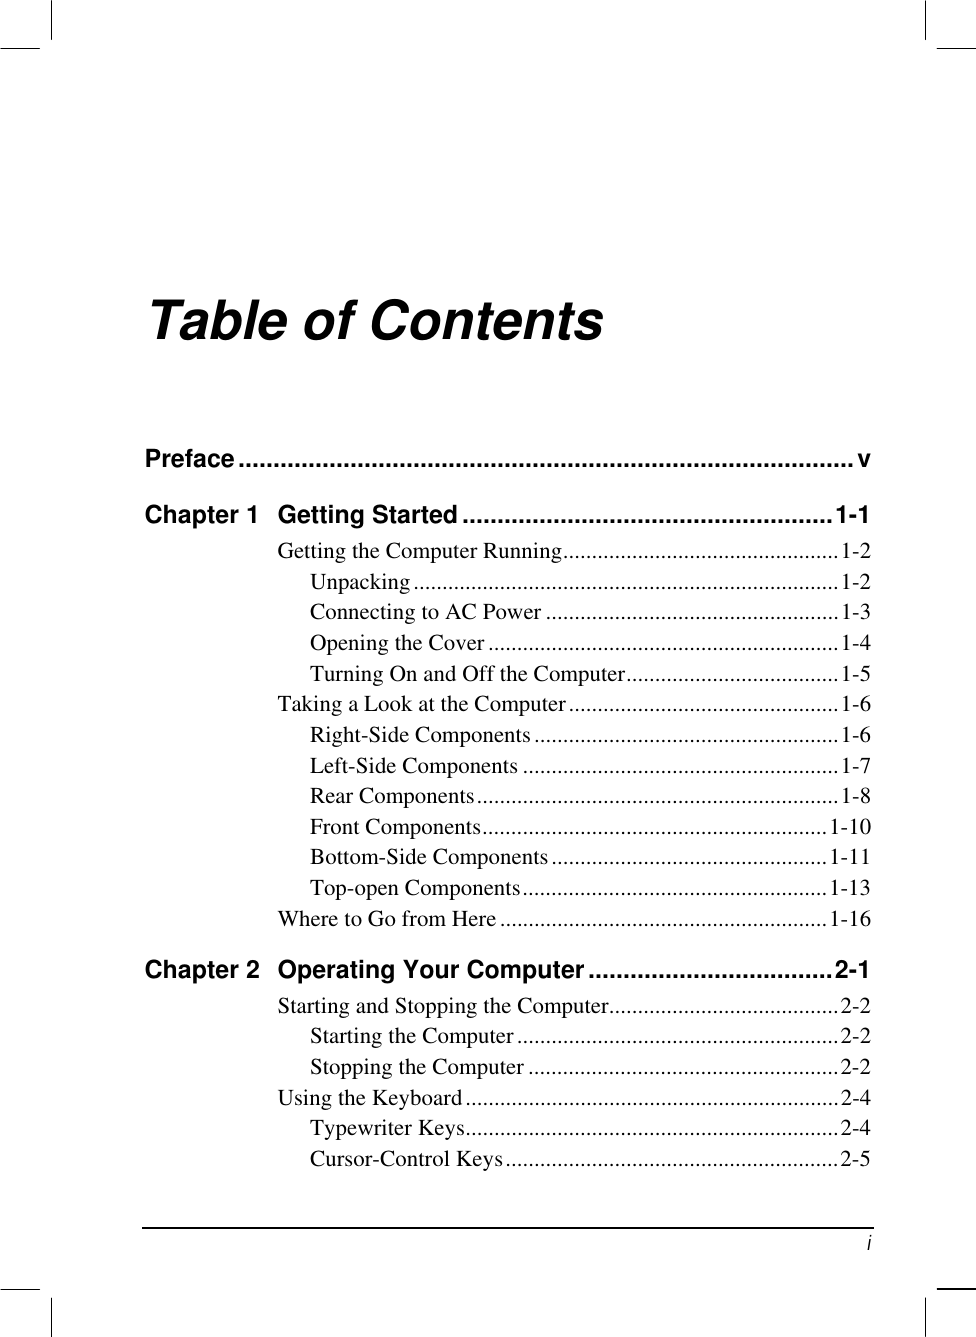   i Table of Contents Preface........................................................................................v Chapter 1  Getting Started.....................................................1-1 Getting the Computer Running................................................1-2 Unpacking..........................................................................1-2 Connecting to AC Power ...................................................1-3 Opening the Cover .............................................................1-4 Turning On and Off the Computer.....................................1-5 Taking a Look at the Computer...............................................1-6 Right-Side Components.....................................................1-6 Left-Side Components .......................................................1-7 Rear Components...............................................................1-8 Front Components............................................................1-10 Bottom-Side Components................................................1-11 Top-open Components.....................................................1-13 Where to Go from Here.........................................................1-16 Chapter 2  Operating Your Computer...................................2-1 Starting and Stopping the Computer........................................2-2 Starting the Computer........................................................2-2 Stopping the Computer ......................................................2-2 Using the Keyboard.................................................................2-4 Typewriter Keys.................................................................2-4 Cursor-Control Keys..........................................................2-5 